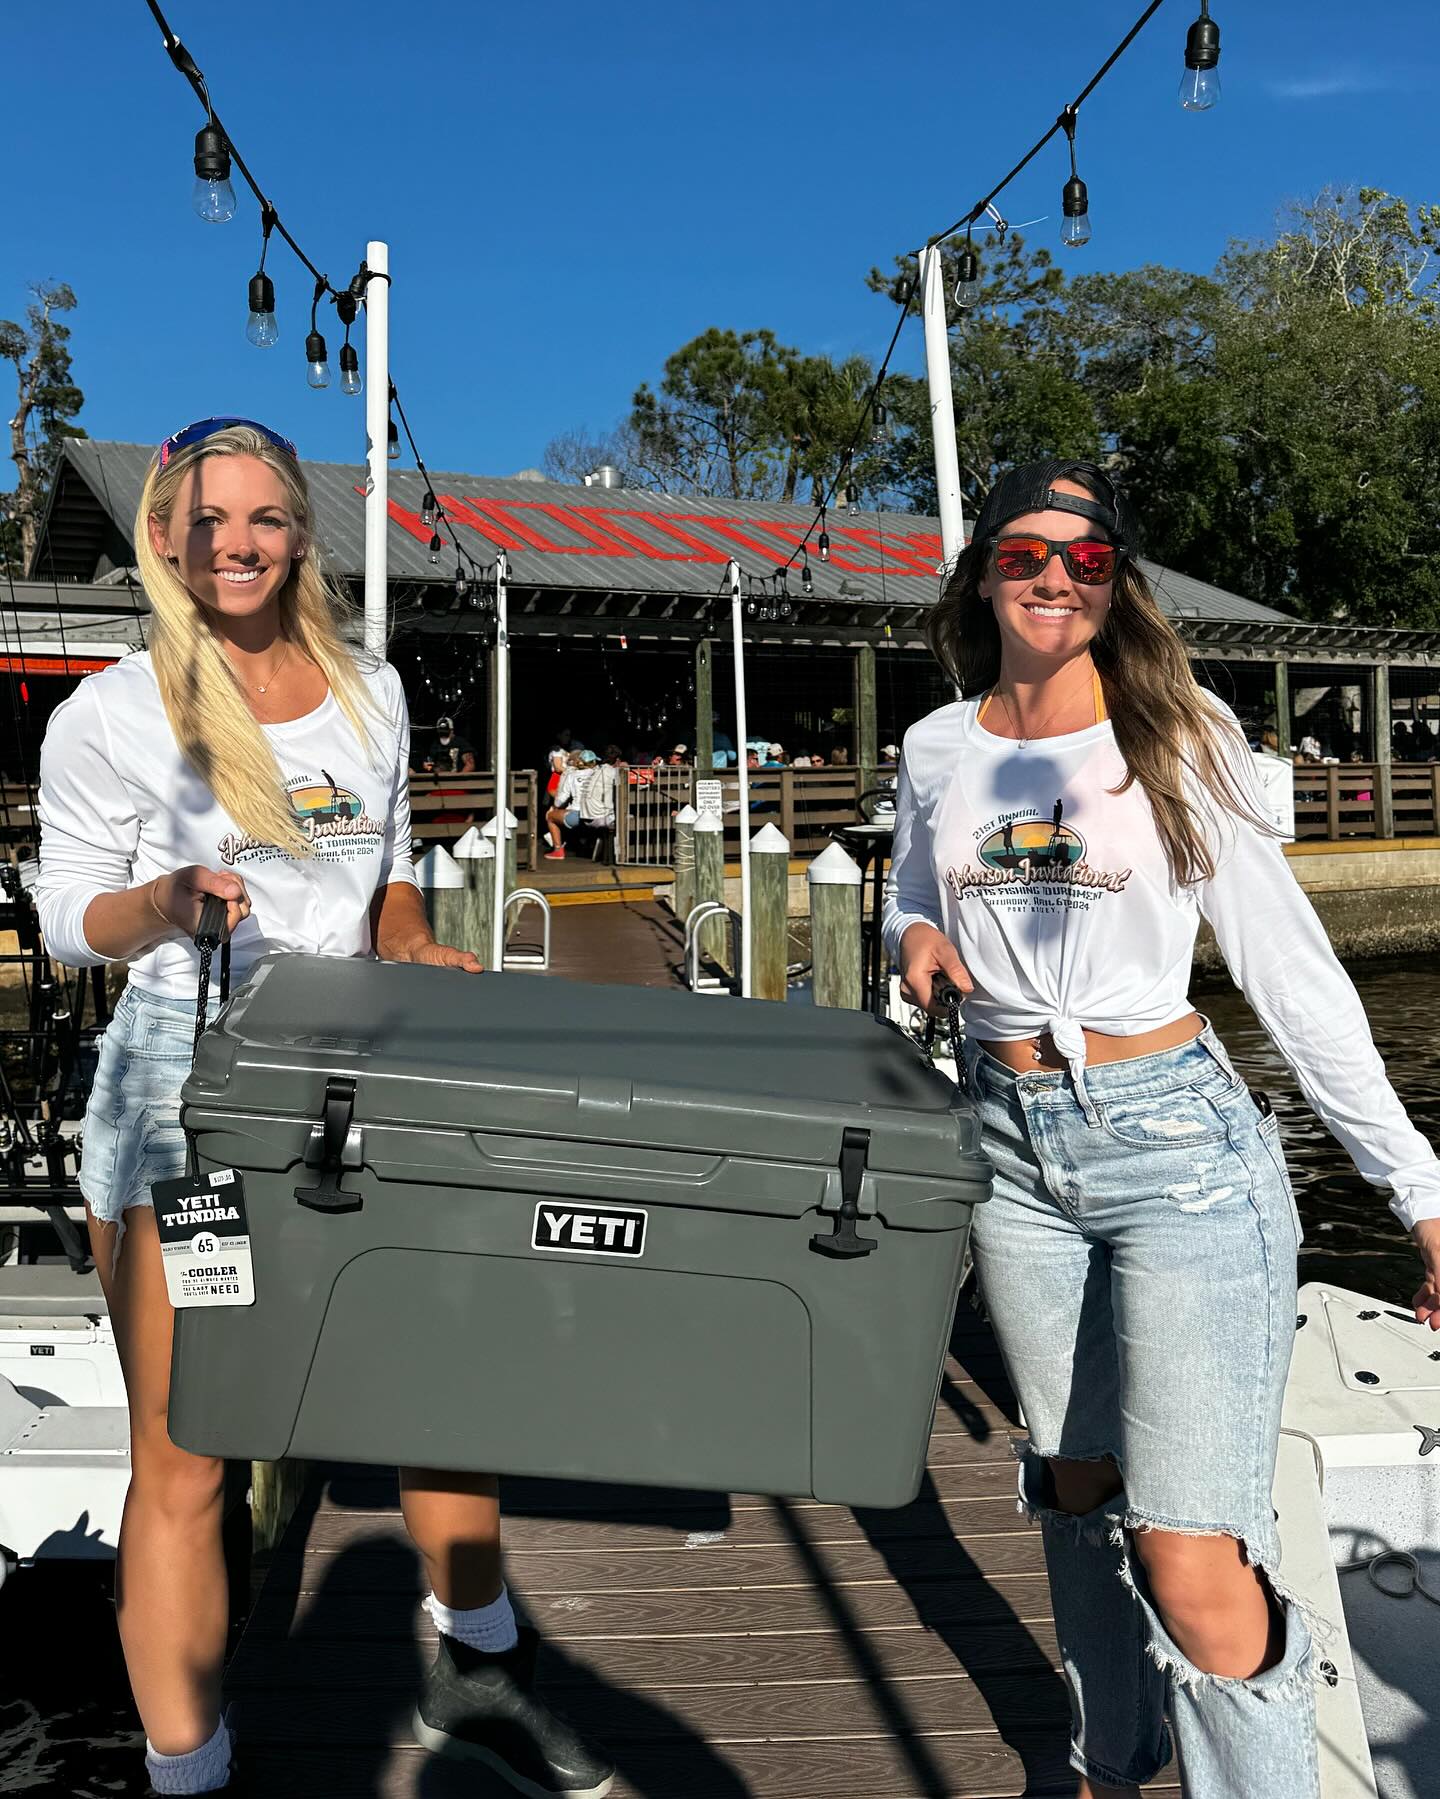 Got on the leaderboard for the @johnsoninvitational with a full slam of 70 inches (total length of a snook, red & trout). Too bad it wasn’t by weight though, this redfish was fat 😂 90 inches won the tournament but still a great time. Even won this Yeti cooler 🍻 #livebait #tournament #newportrichey #hooters